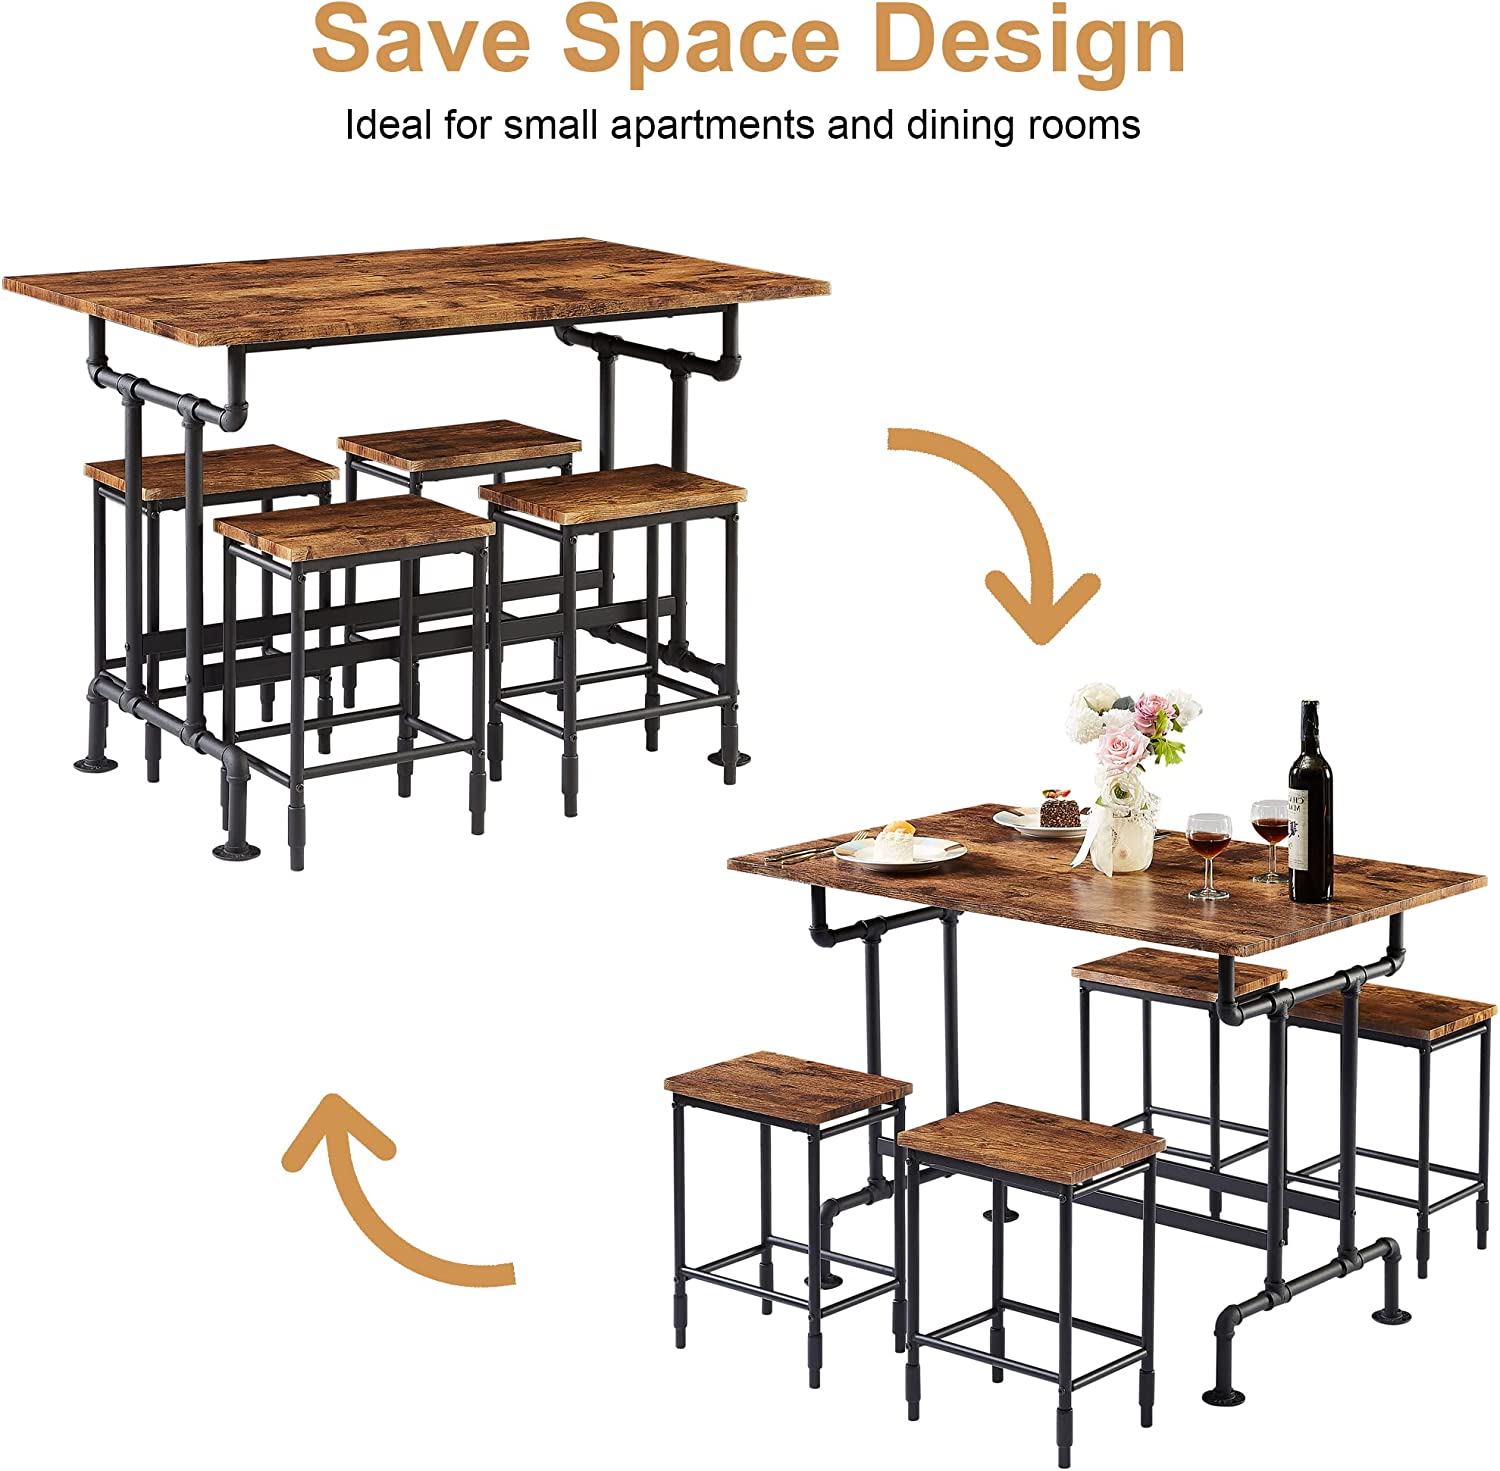 VECELO Farmhouse Dining Table Set for 4 Kitchen Industrial Bar Dinette with Rectangular Tabletop